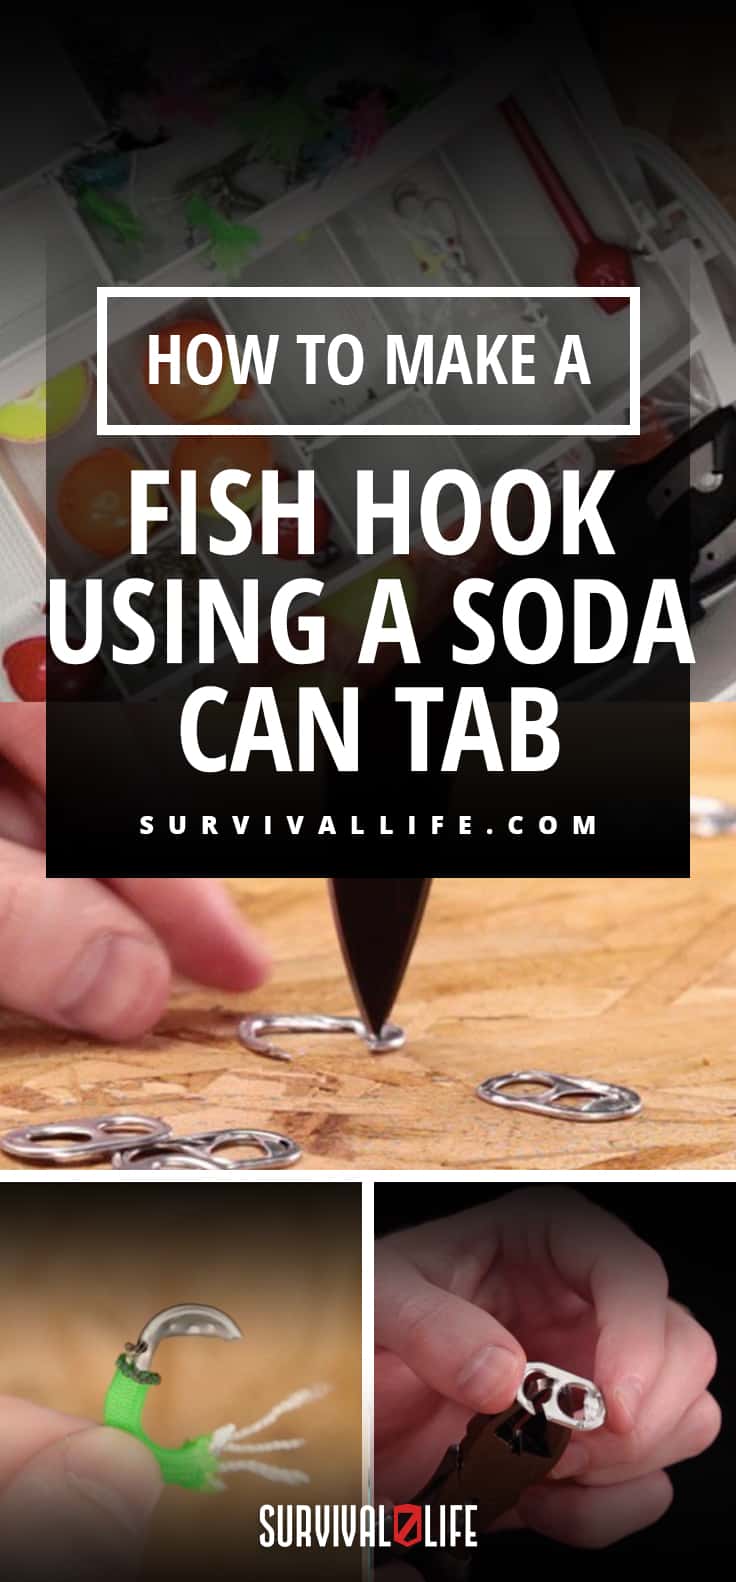 How to Make a Fish Hook Using a Soda Can Tab